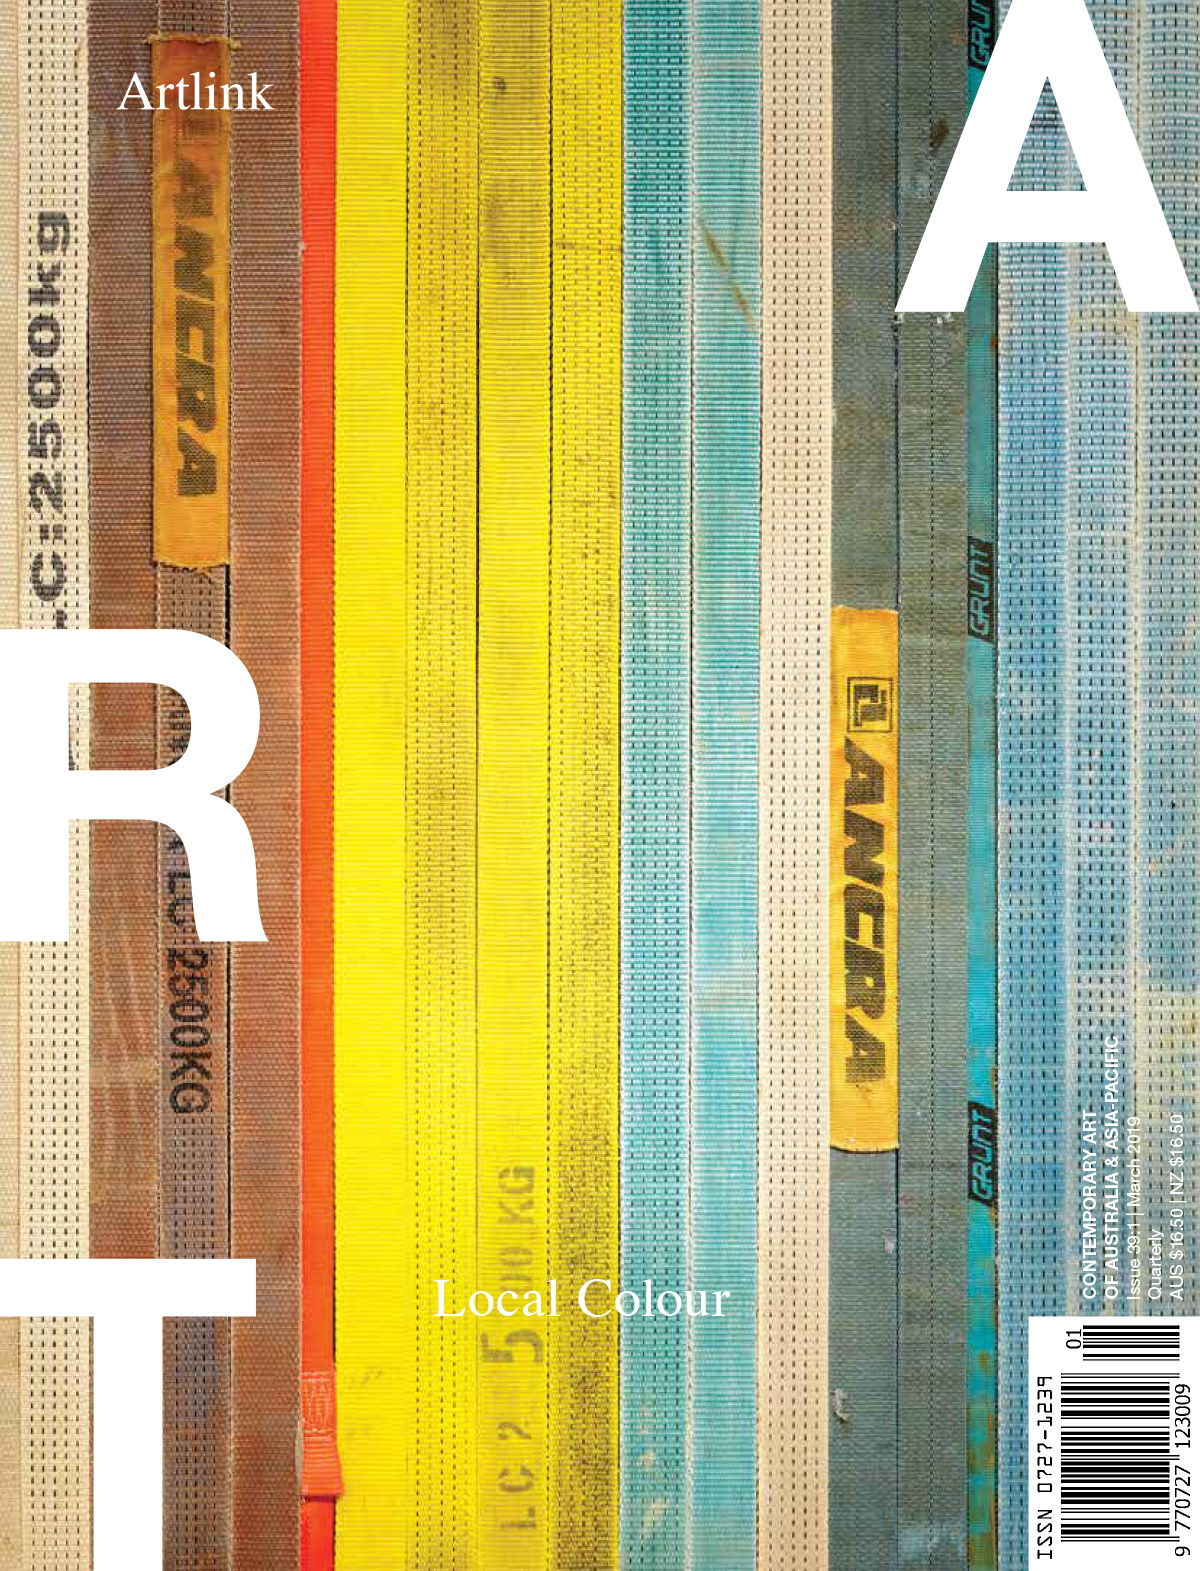 Issue 39:1 | March 2019 | Local Colour